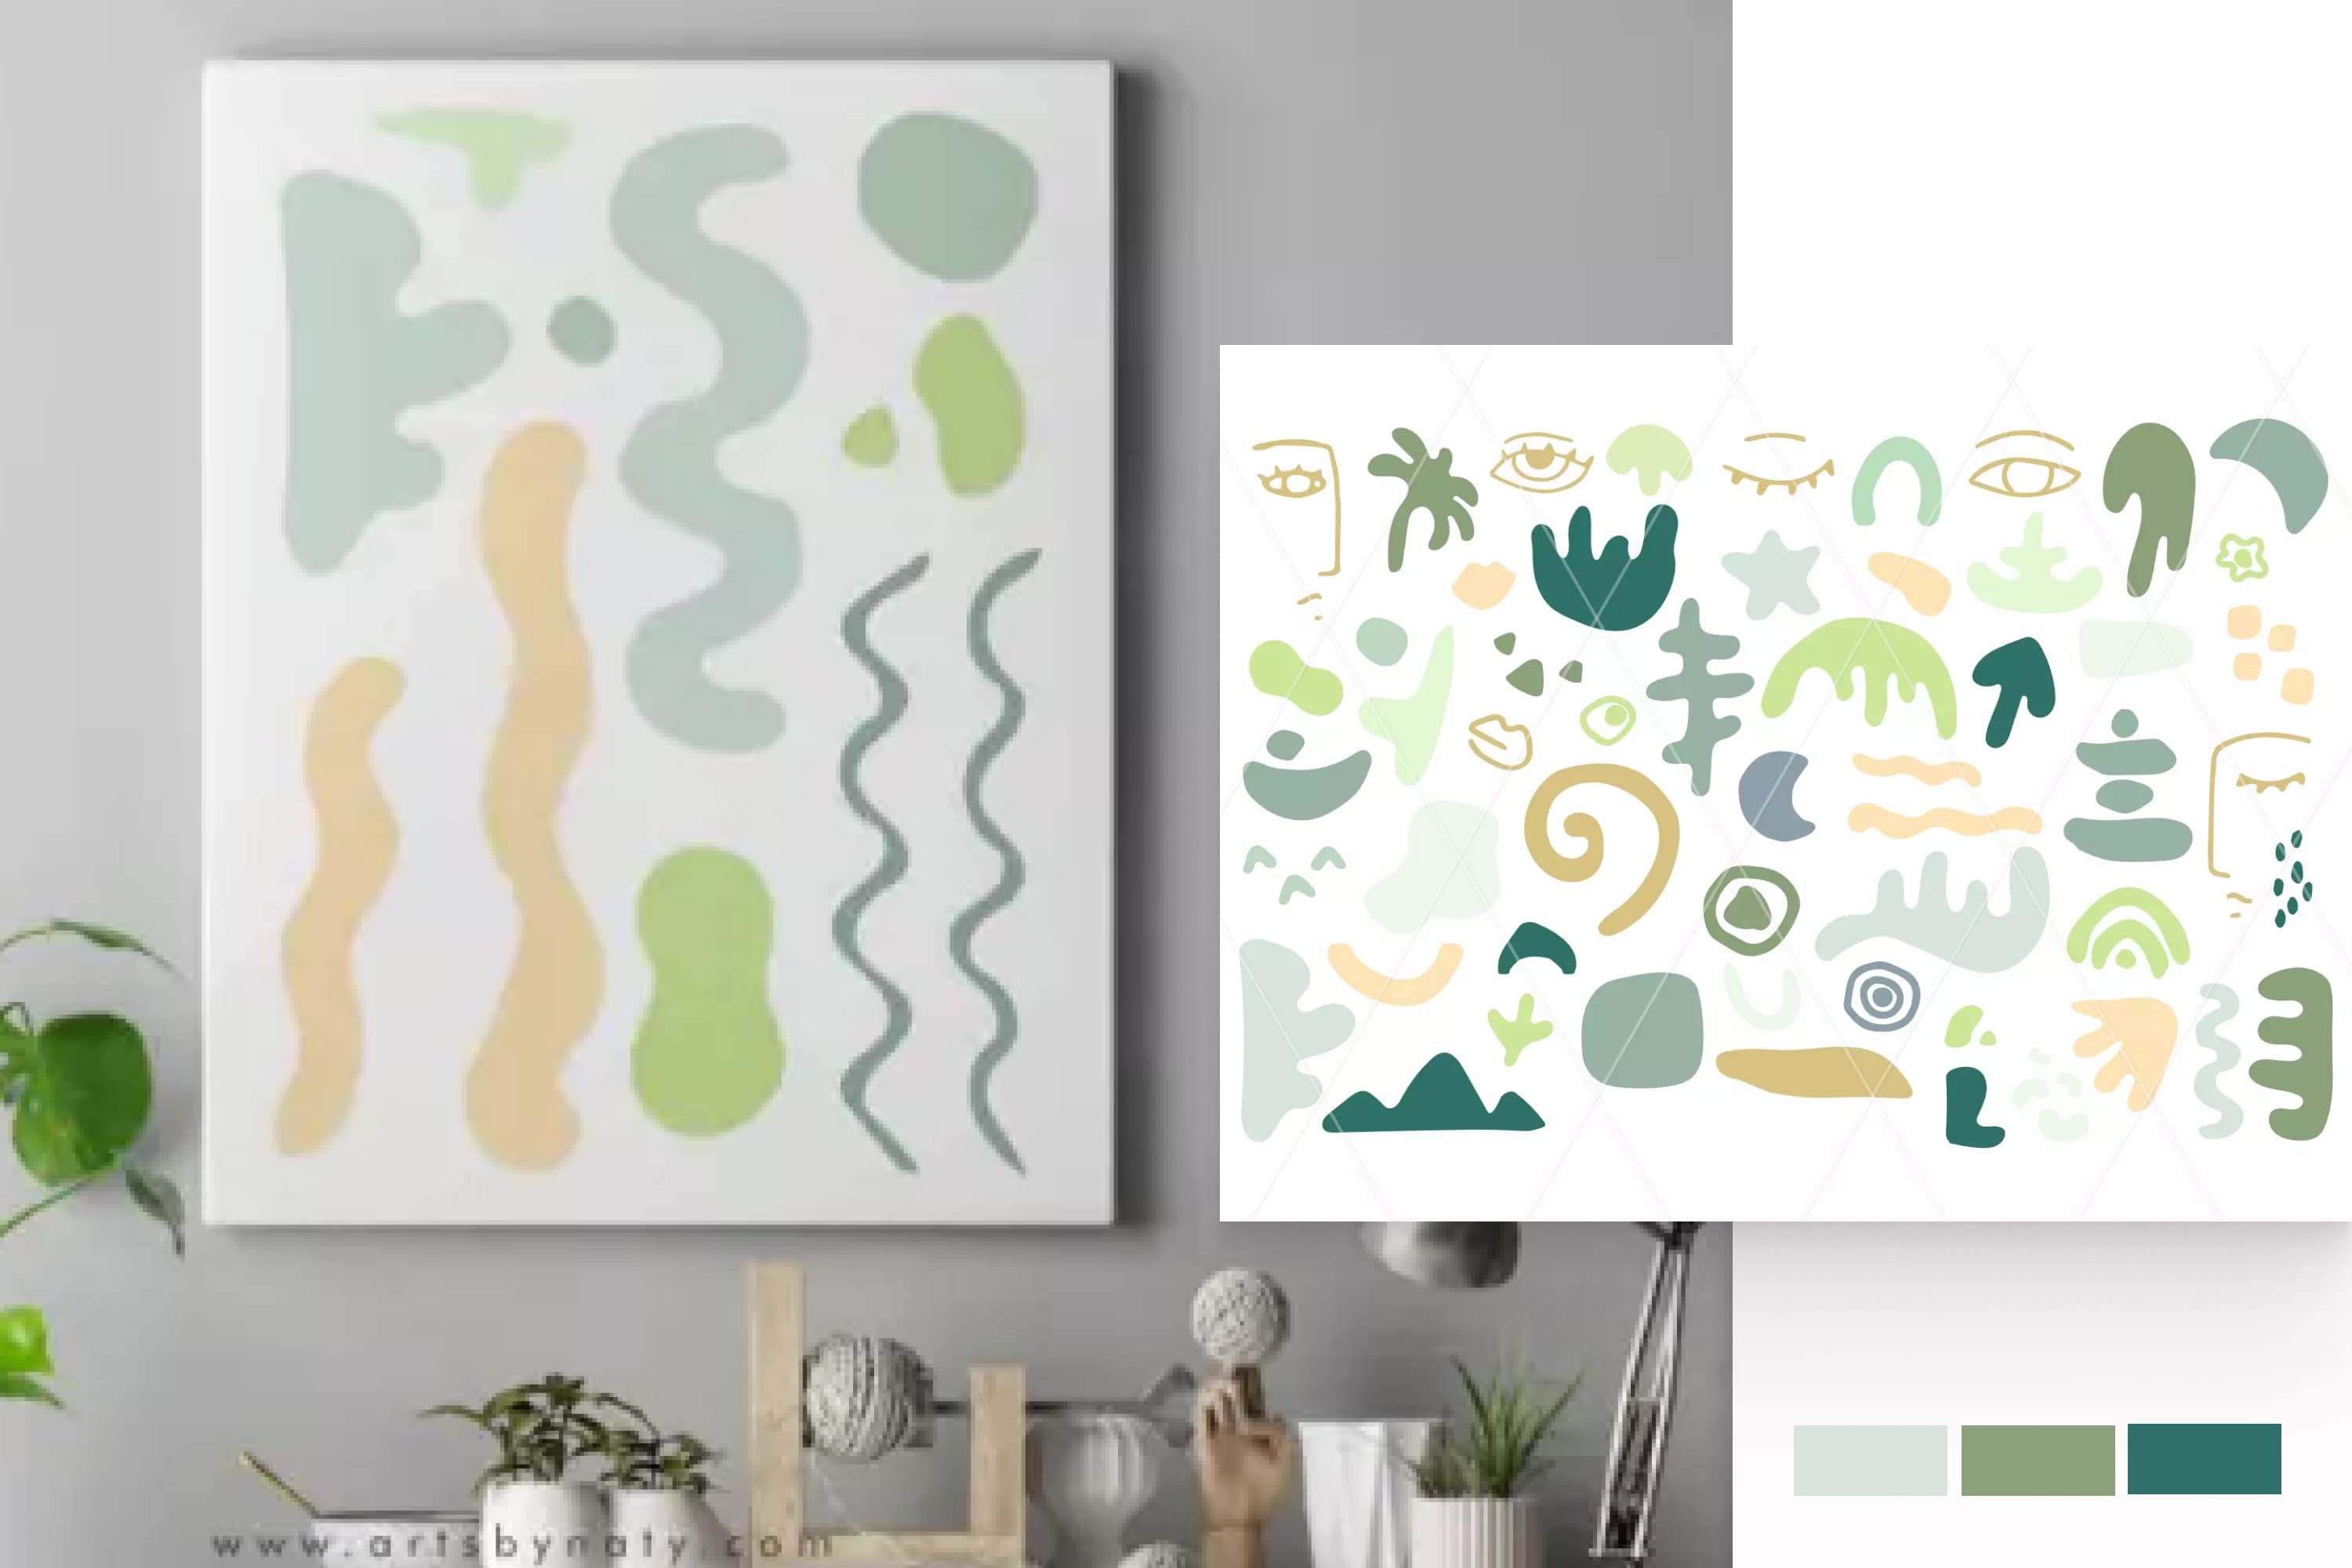 Collage of paintings with abstract geometric shapes in soft colors.